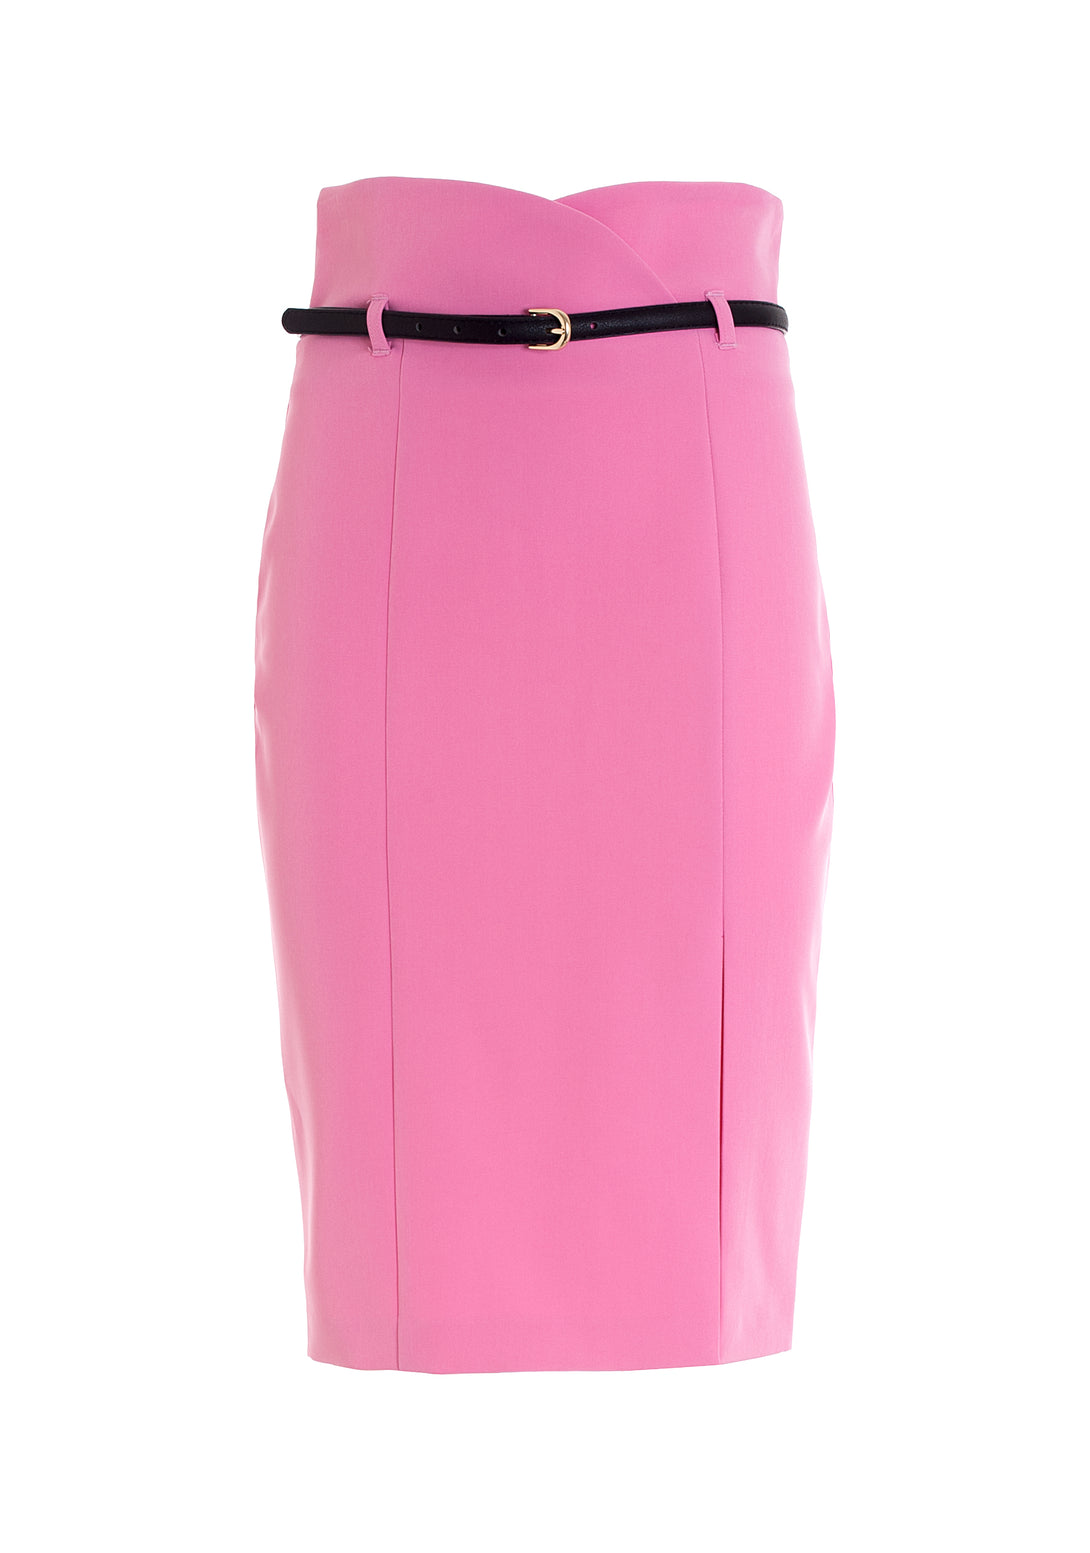 Sheath skirt slim fit middle length made in technical fabric